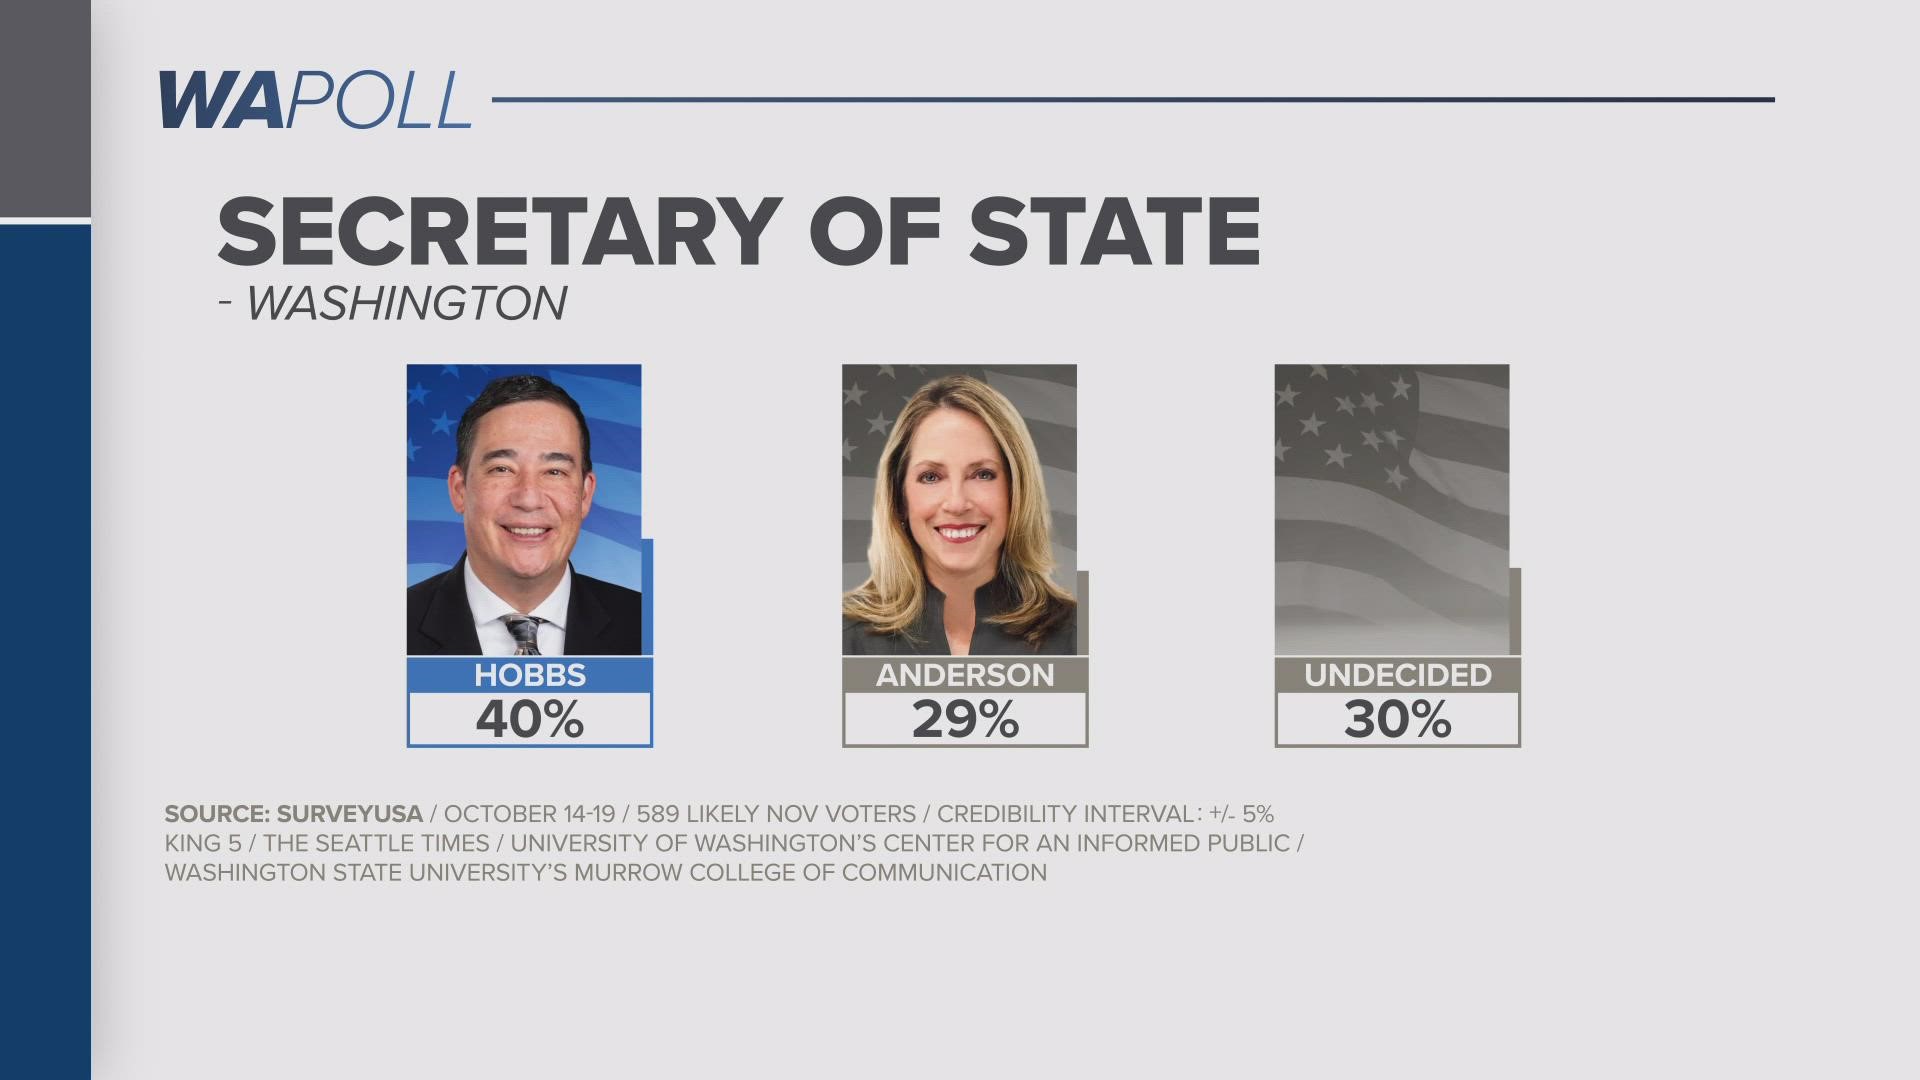 According to a poll commissioned by KING 5, 30% of voters in the race for Washington Secretary of State between Steve Hobbs and Julie Anderson